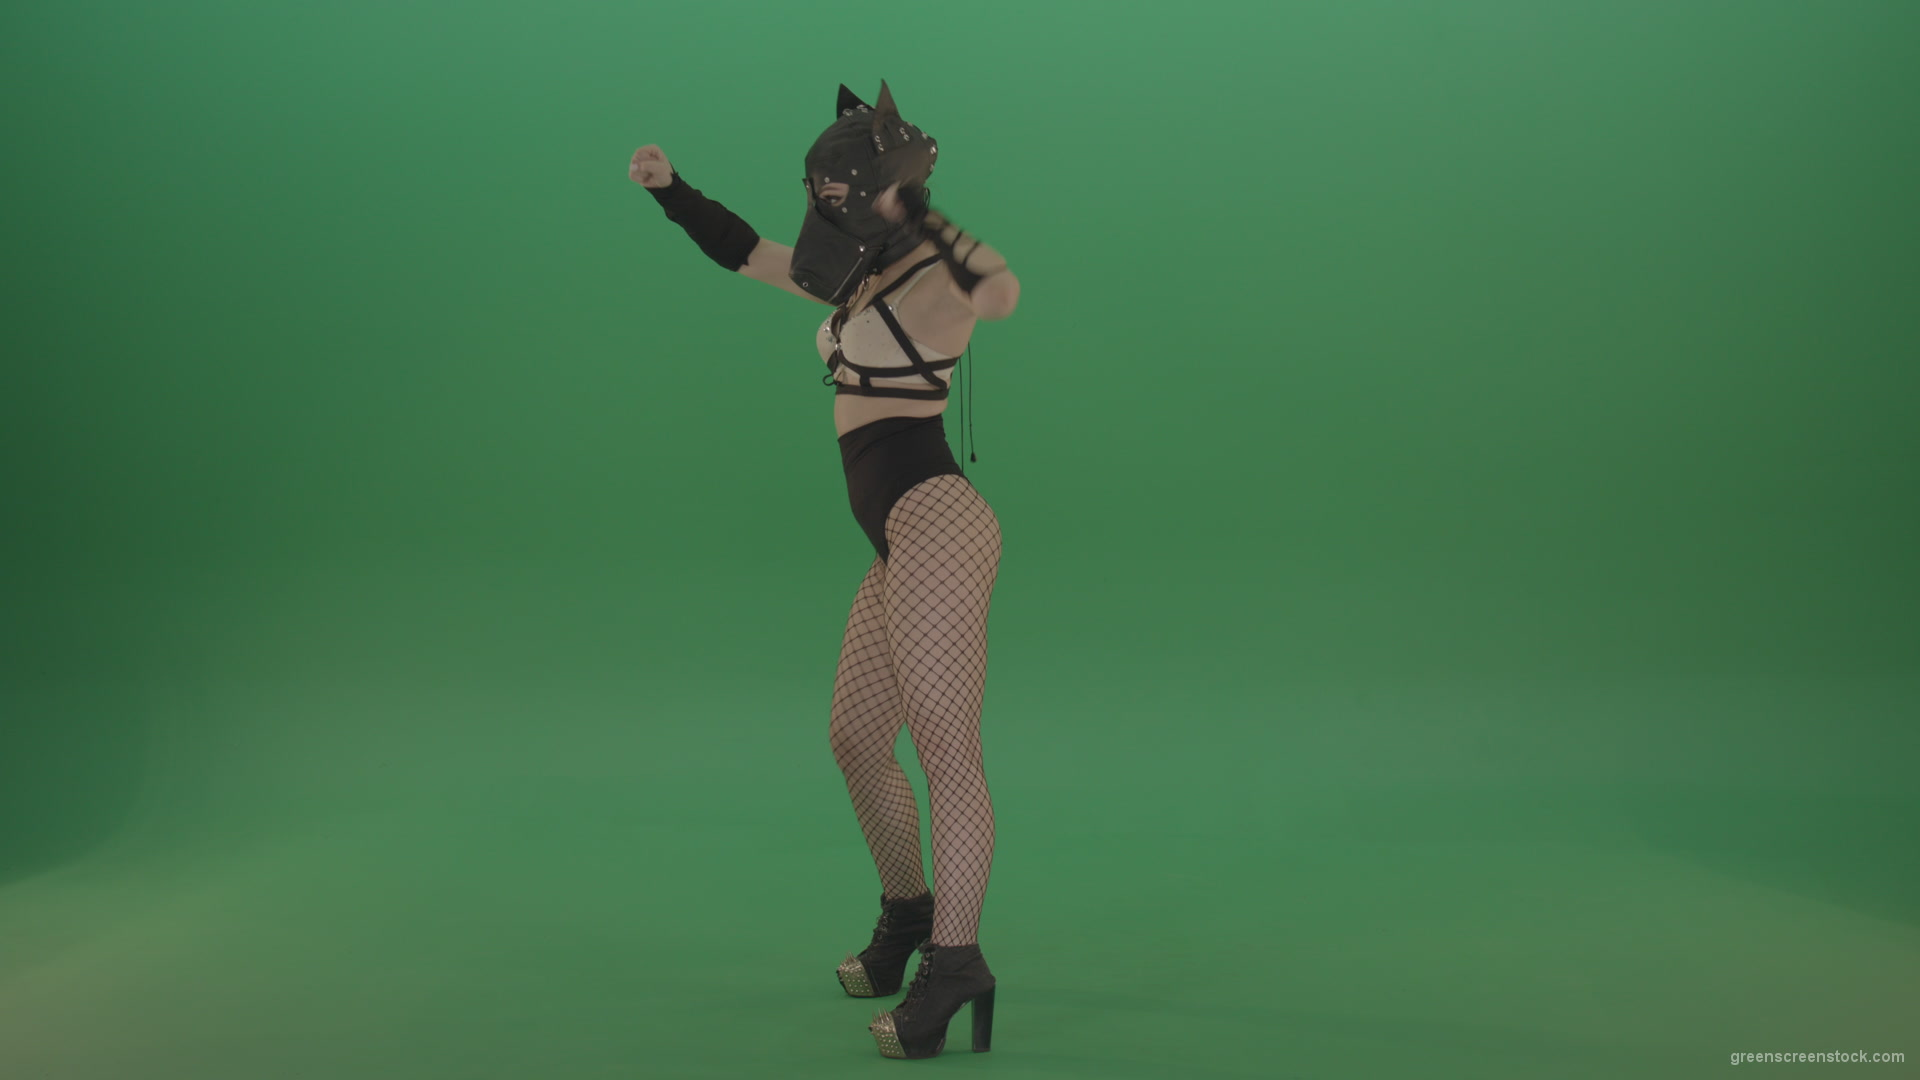 EDM-Girl-in-Wolf-Mask-making-fight-beats-on-green-screen_007 Green Screen Stock